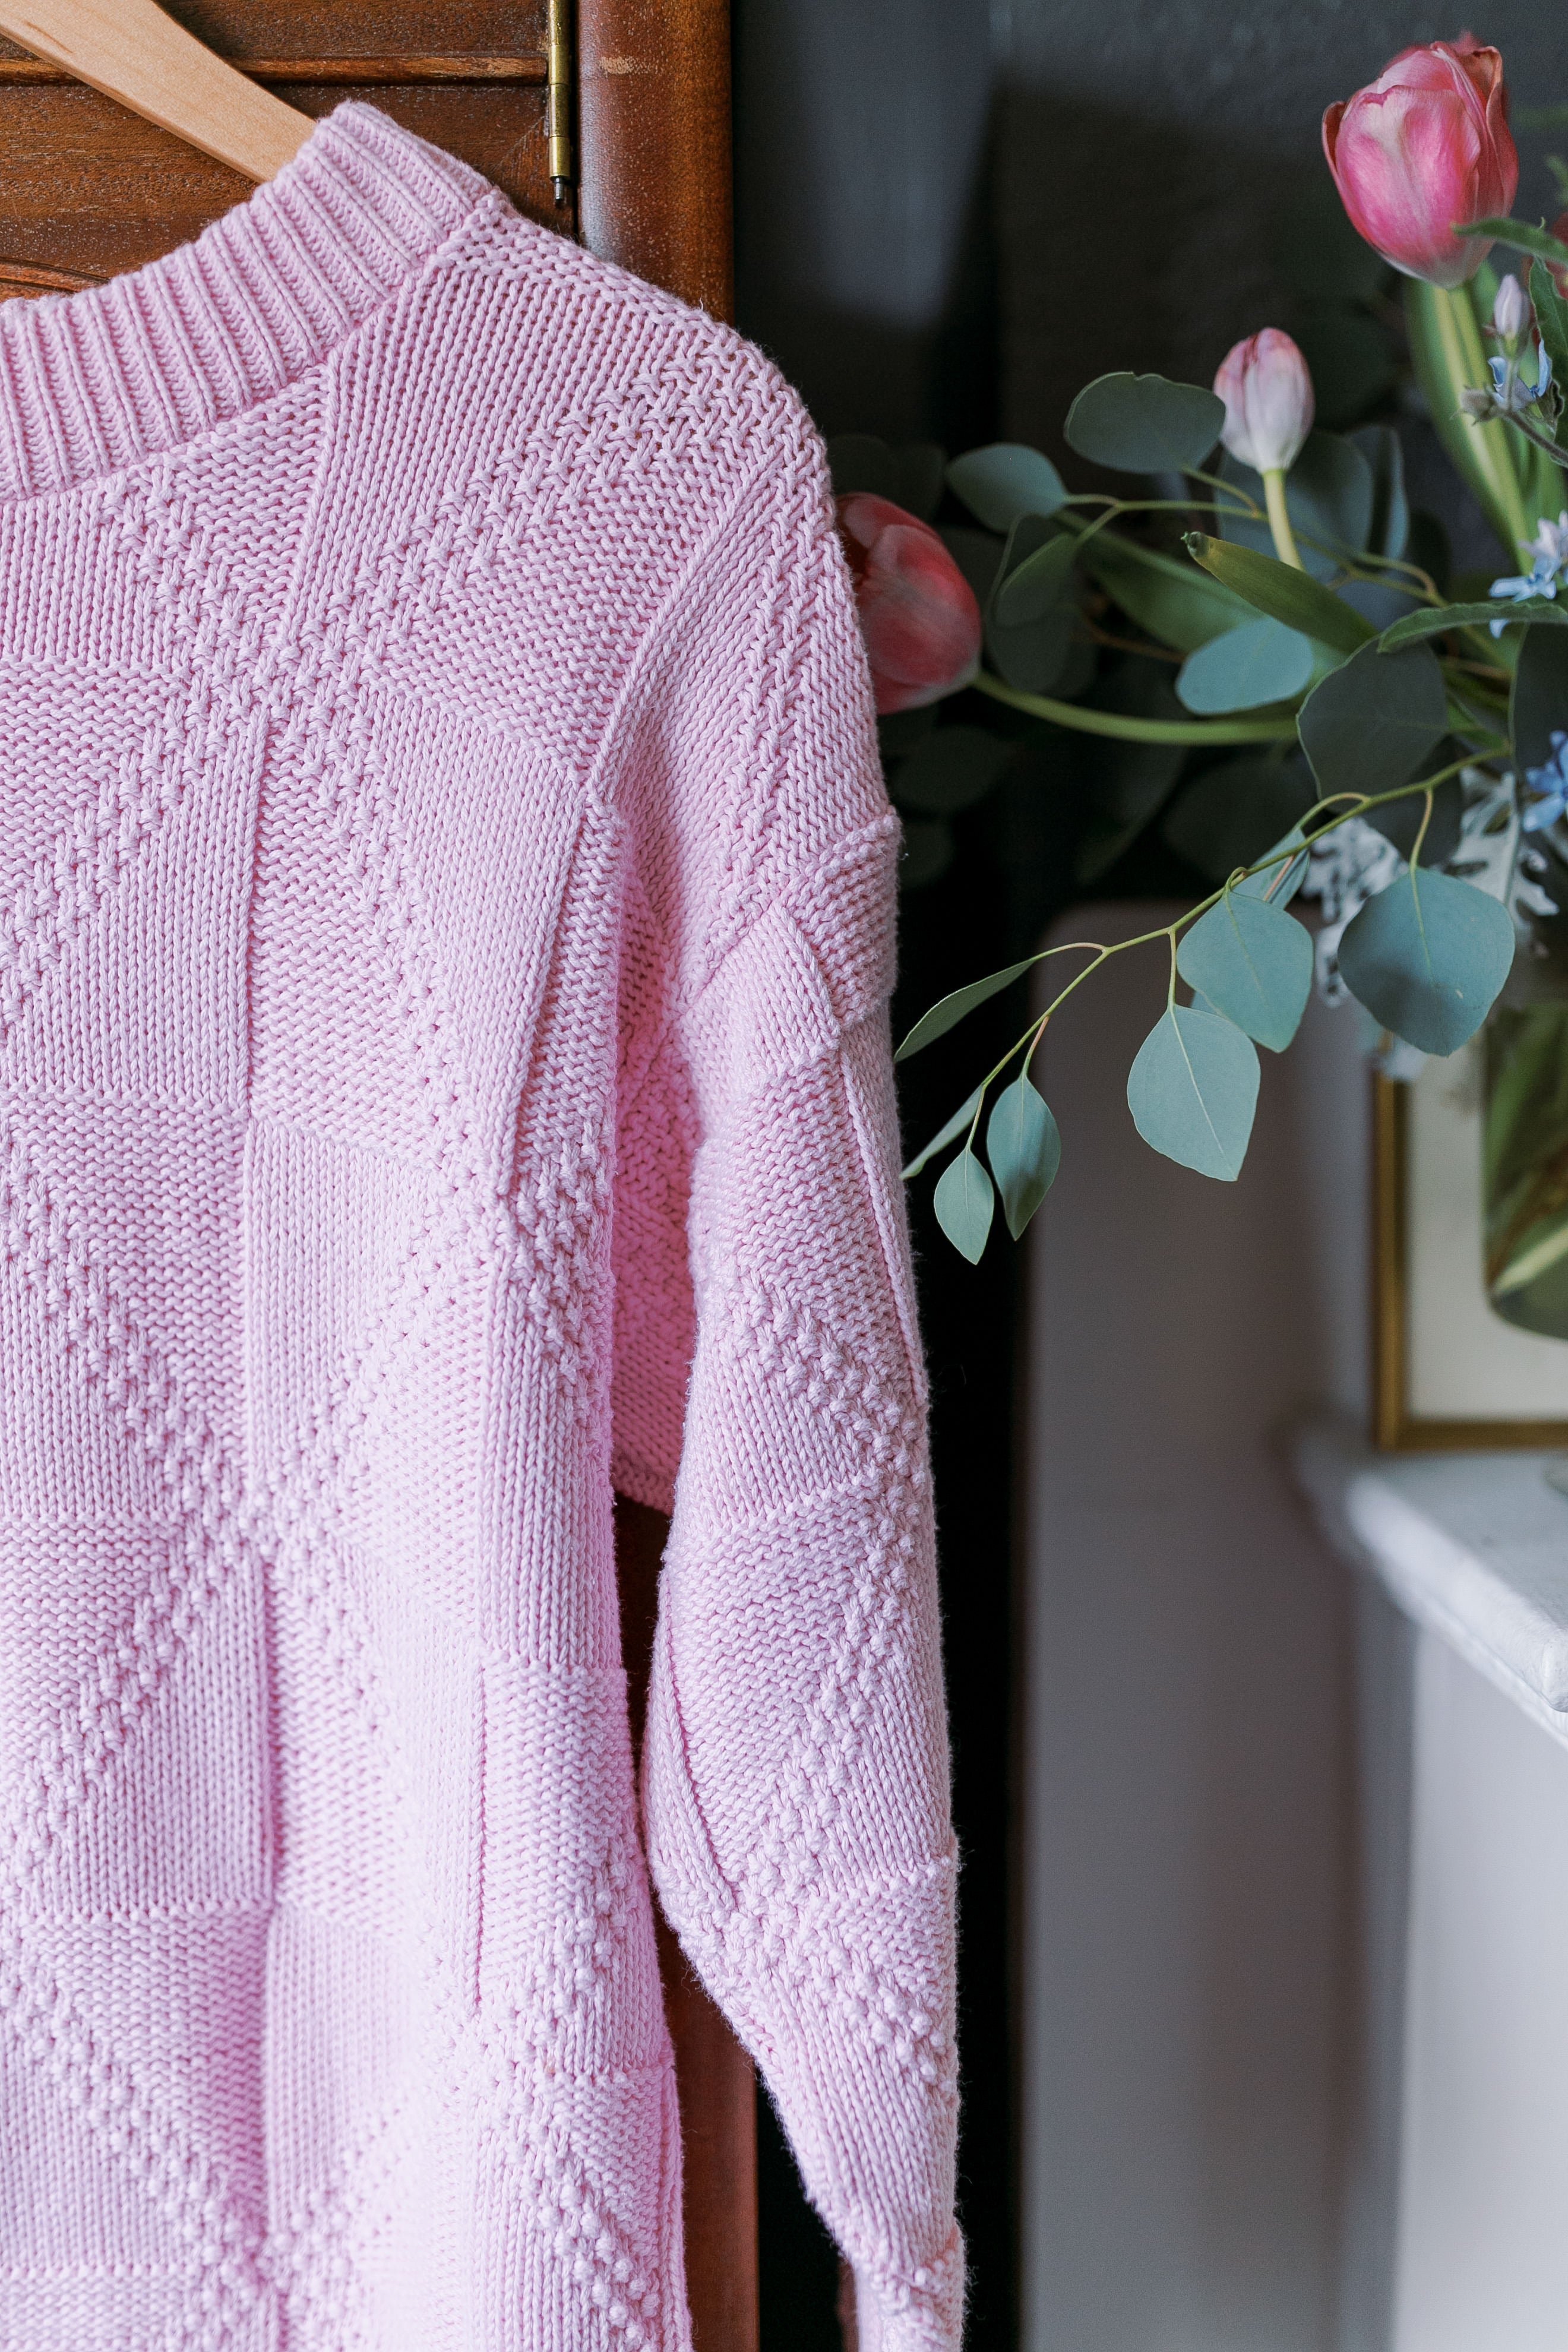 Made in the USA Vintage Pink Knitted Pullover